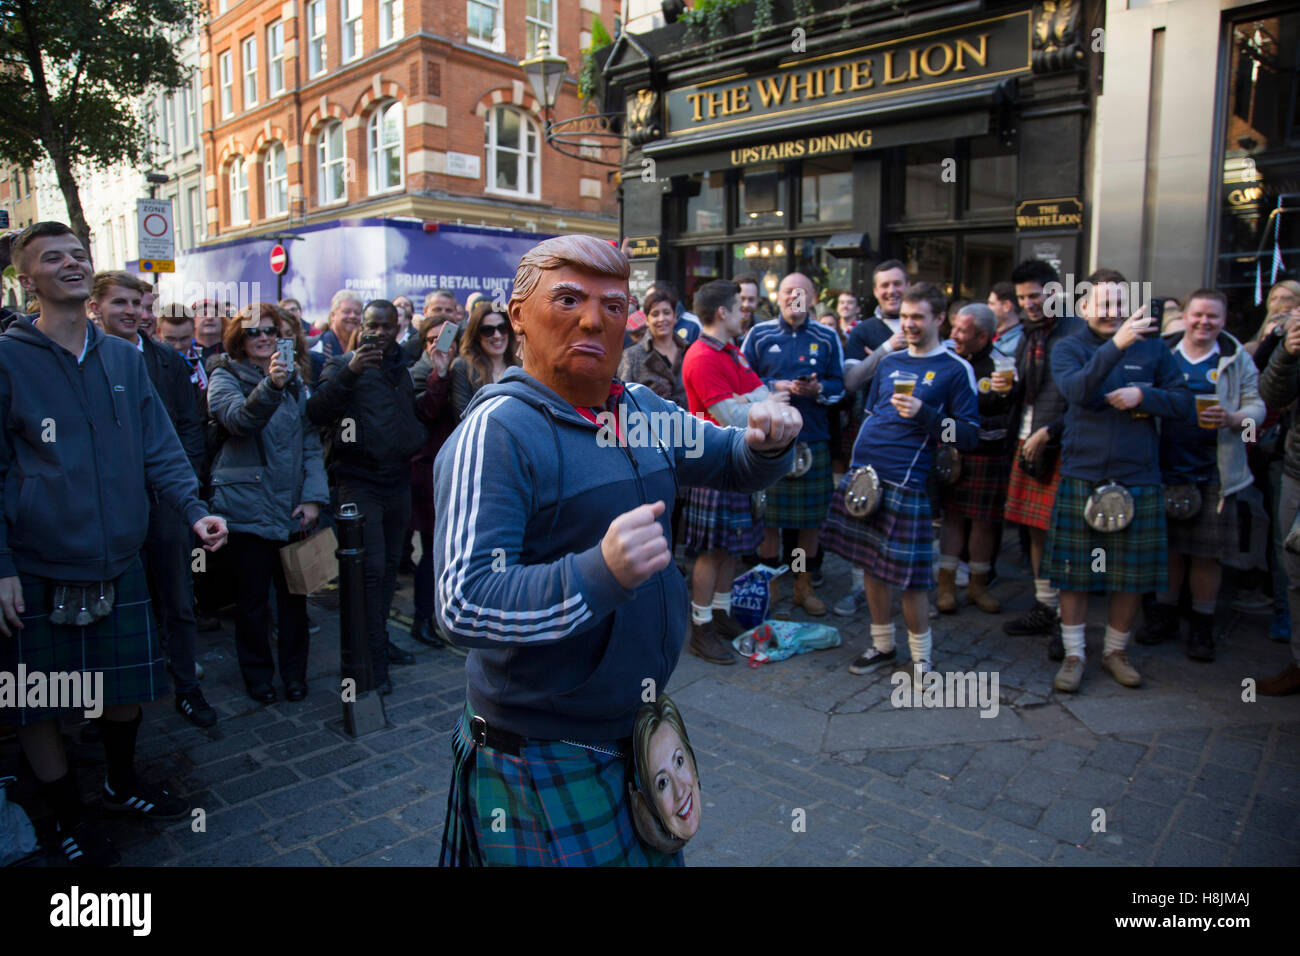 Scotland fans including one with a Donald Trump mask in joyous mood drinking and singing together  in Covent Garden ahead of their football match, England vs Scotland, World Cup Qualifiers Group stage on 11th November 2016 in London, United Kingdom. The Home International rivalry between their respective national teams is the oldest international fixture in the world, first played in 1872. Stock Photo